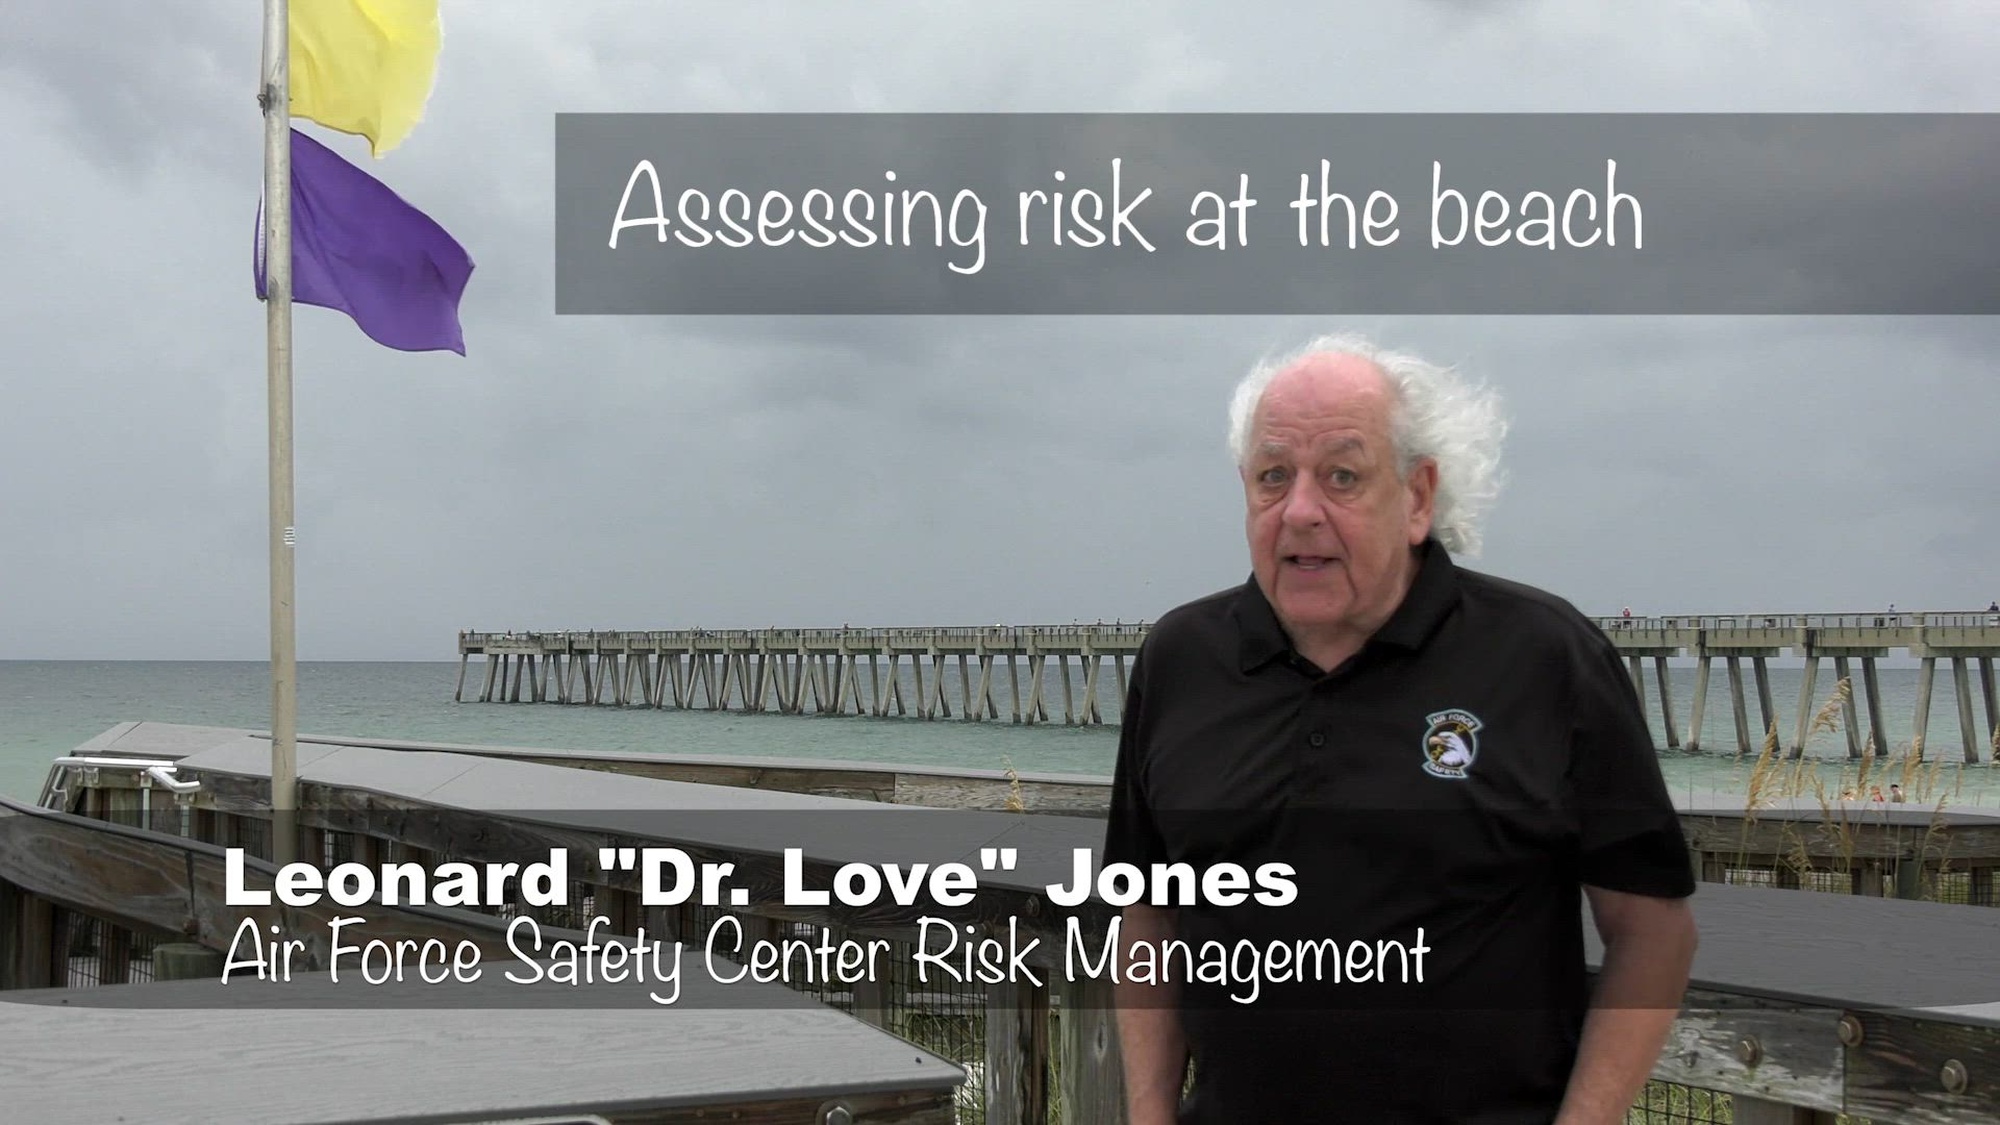 Leonard "Dr. Love" Jones goes to the beach and finds that the water conditions are hazardous and decides to opt out of going in for a swim. He encourages everyone to use sound risk management for all your summer activities. He also explains the importance of the beach flags and what each color means.